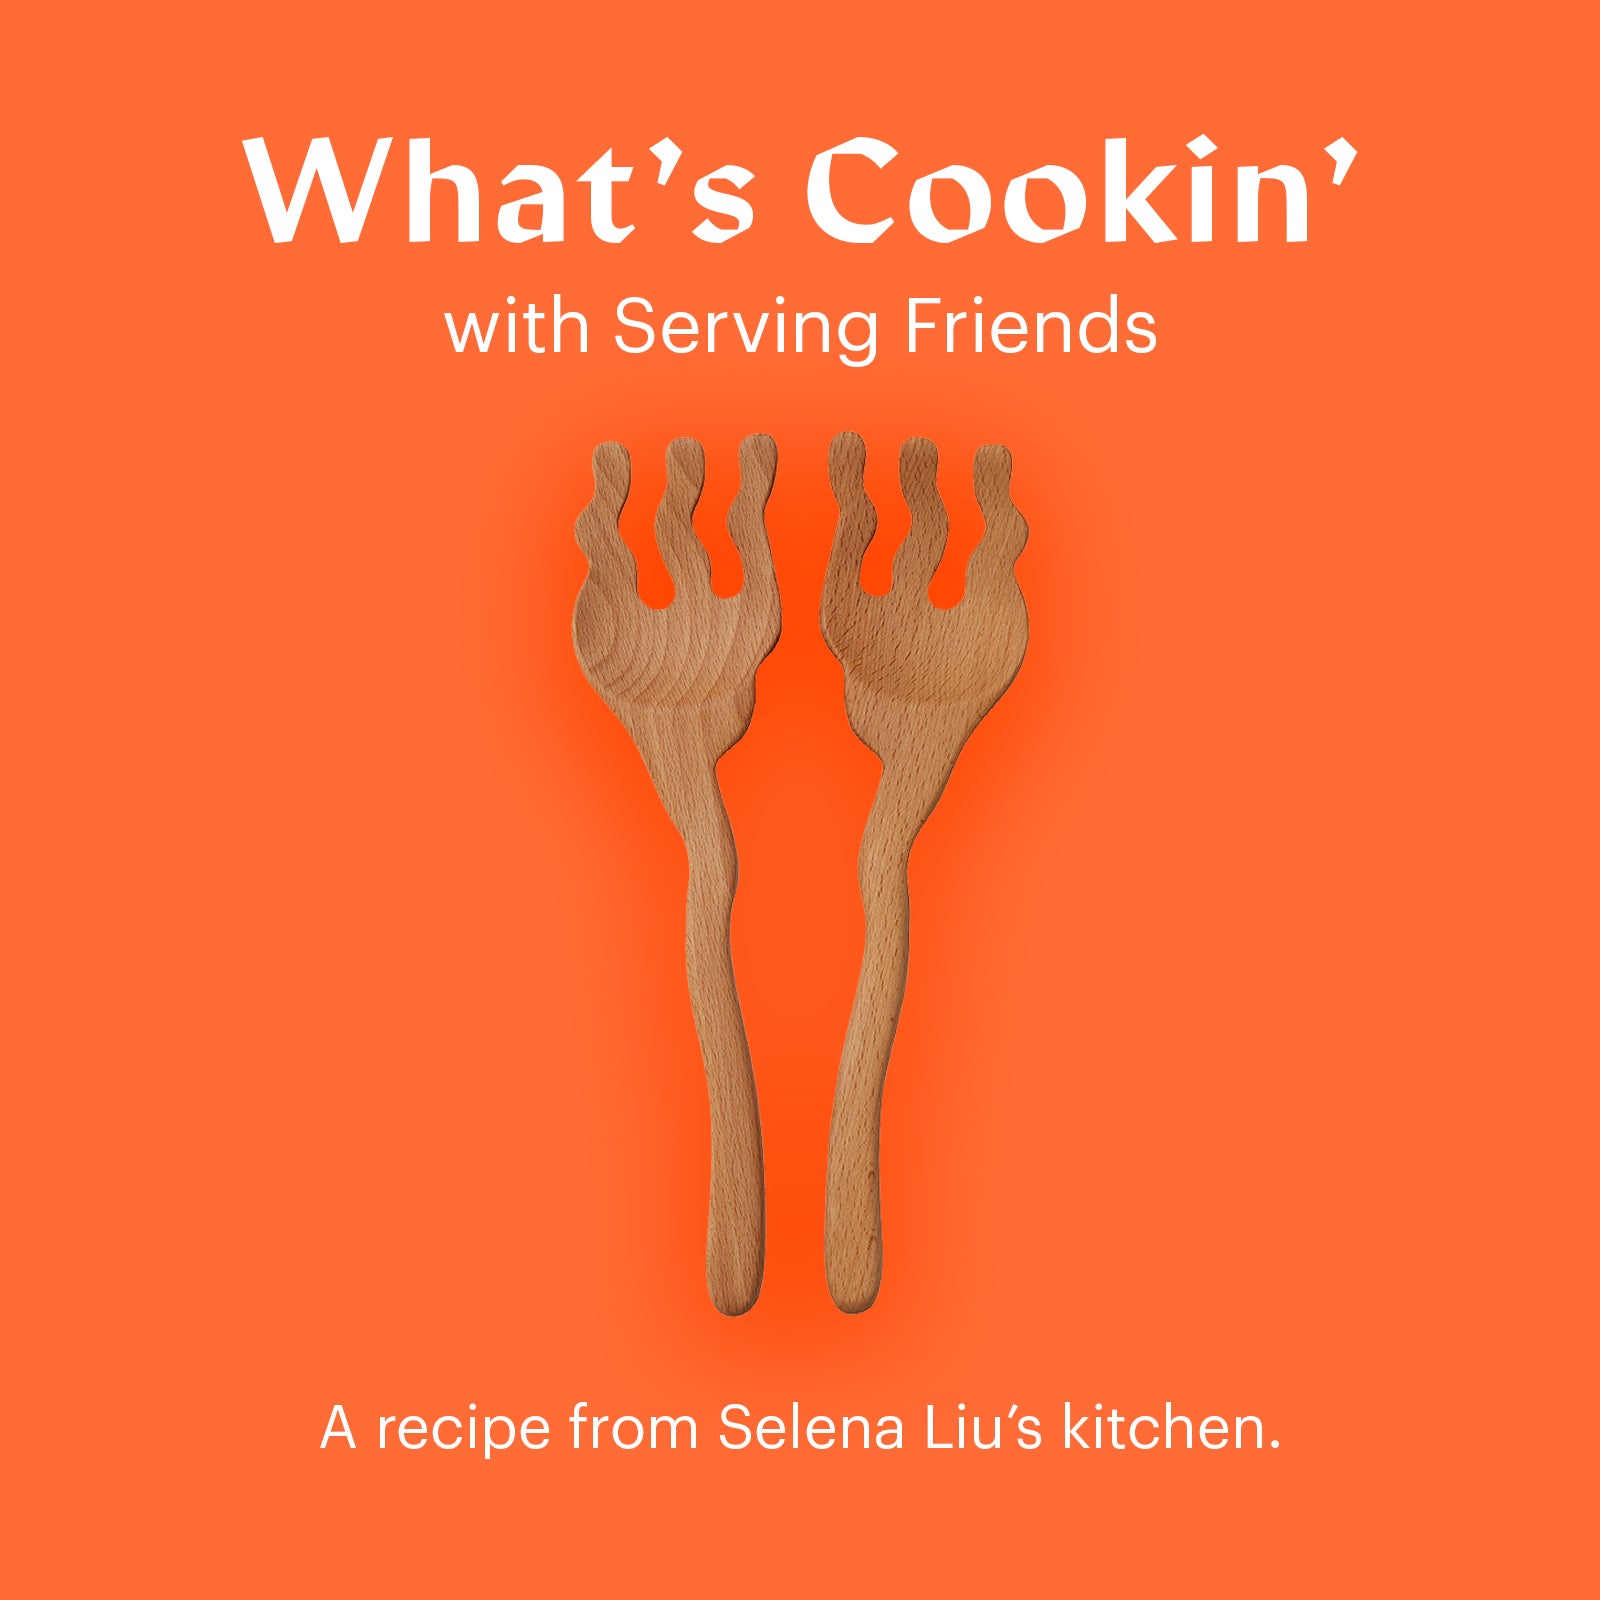 What's Cookin' with Serving Friends